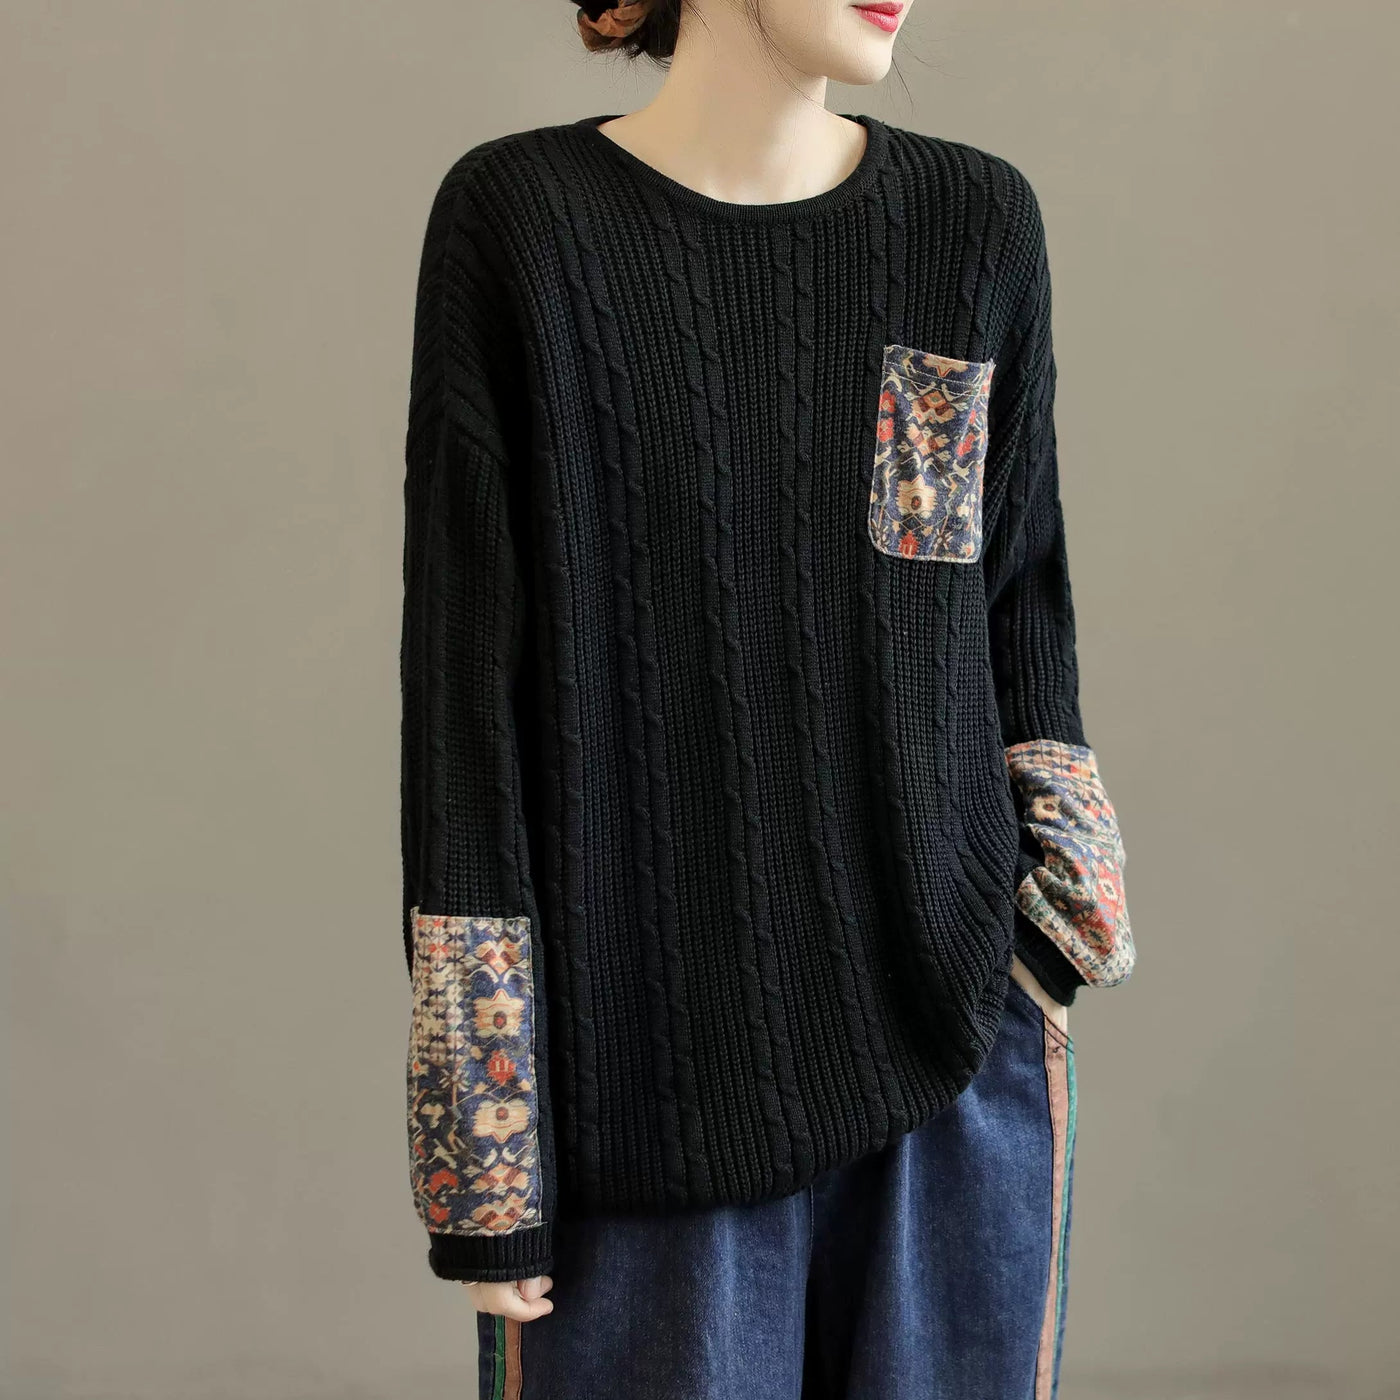 Women Retro Cotton Knitted Autumn Pullover Sweater Sep 2022 New Arrival One Size Black 